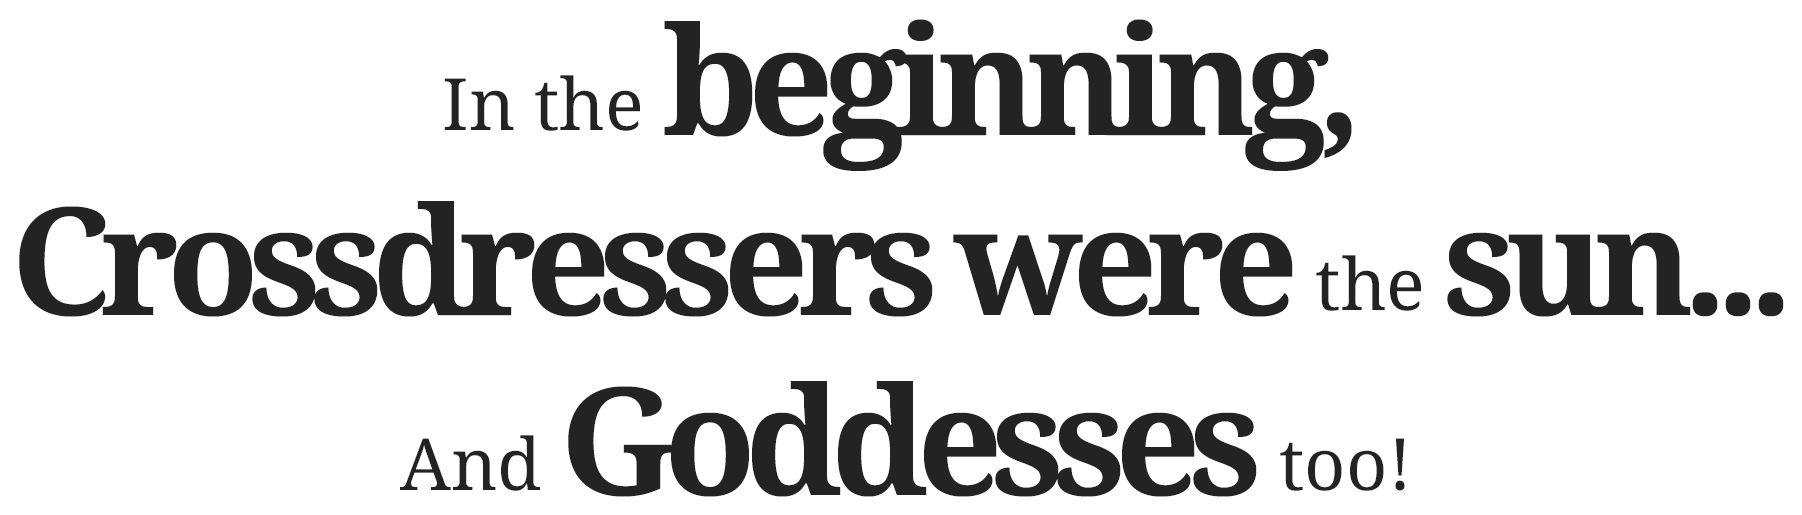 In the beginning, Crossdressers were the sun... And Goddesses too!